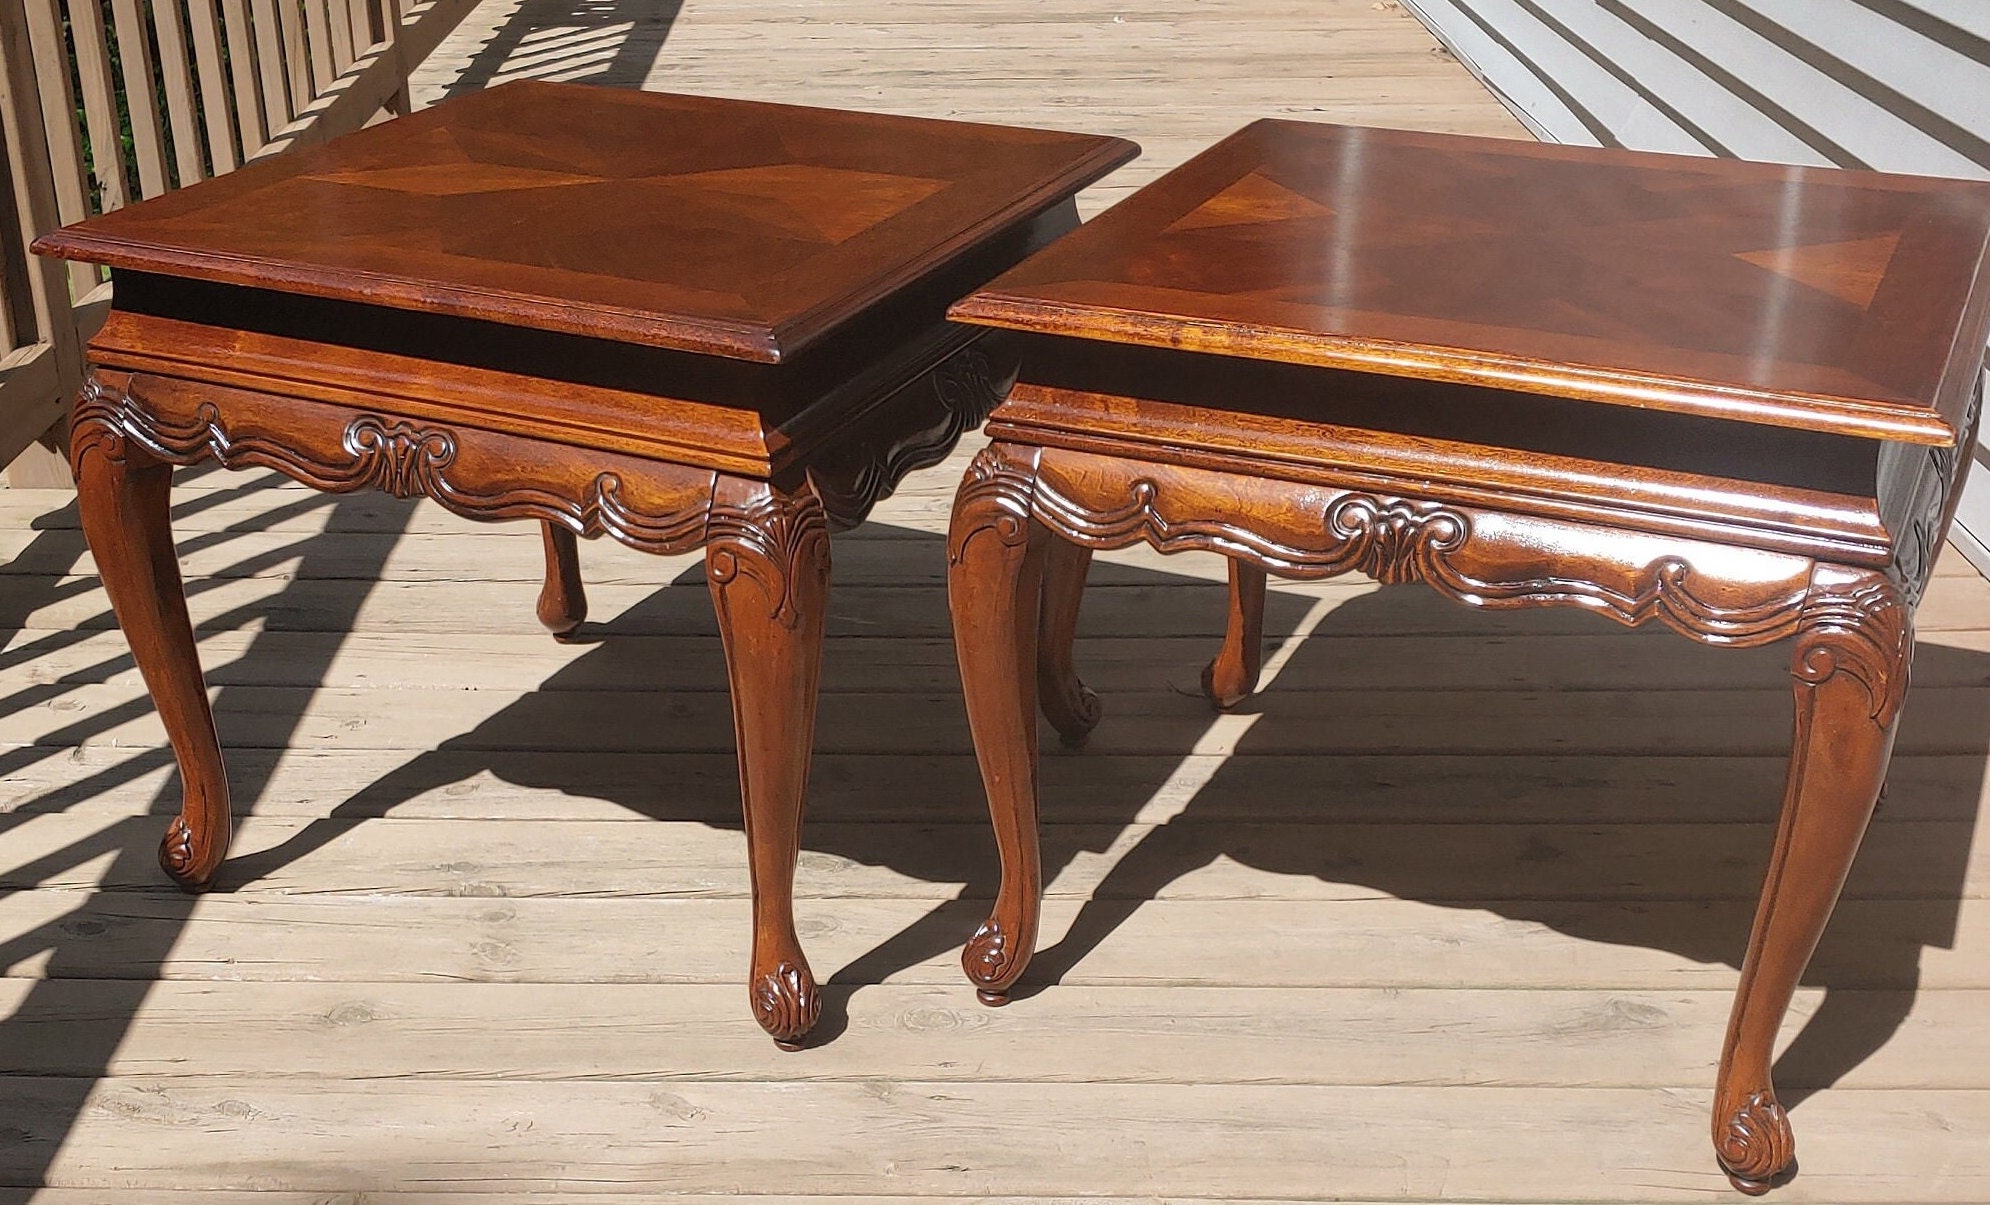 French modern mahogany 4 tier pivoting mexique table style of